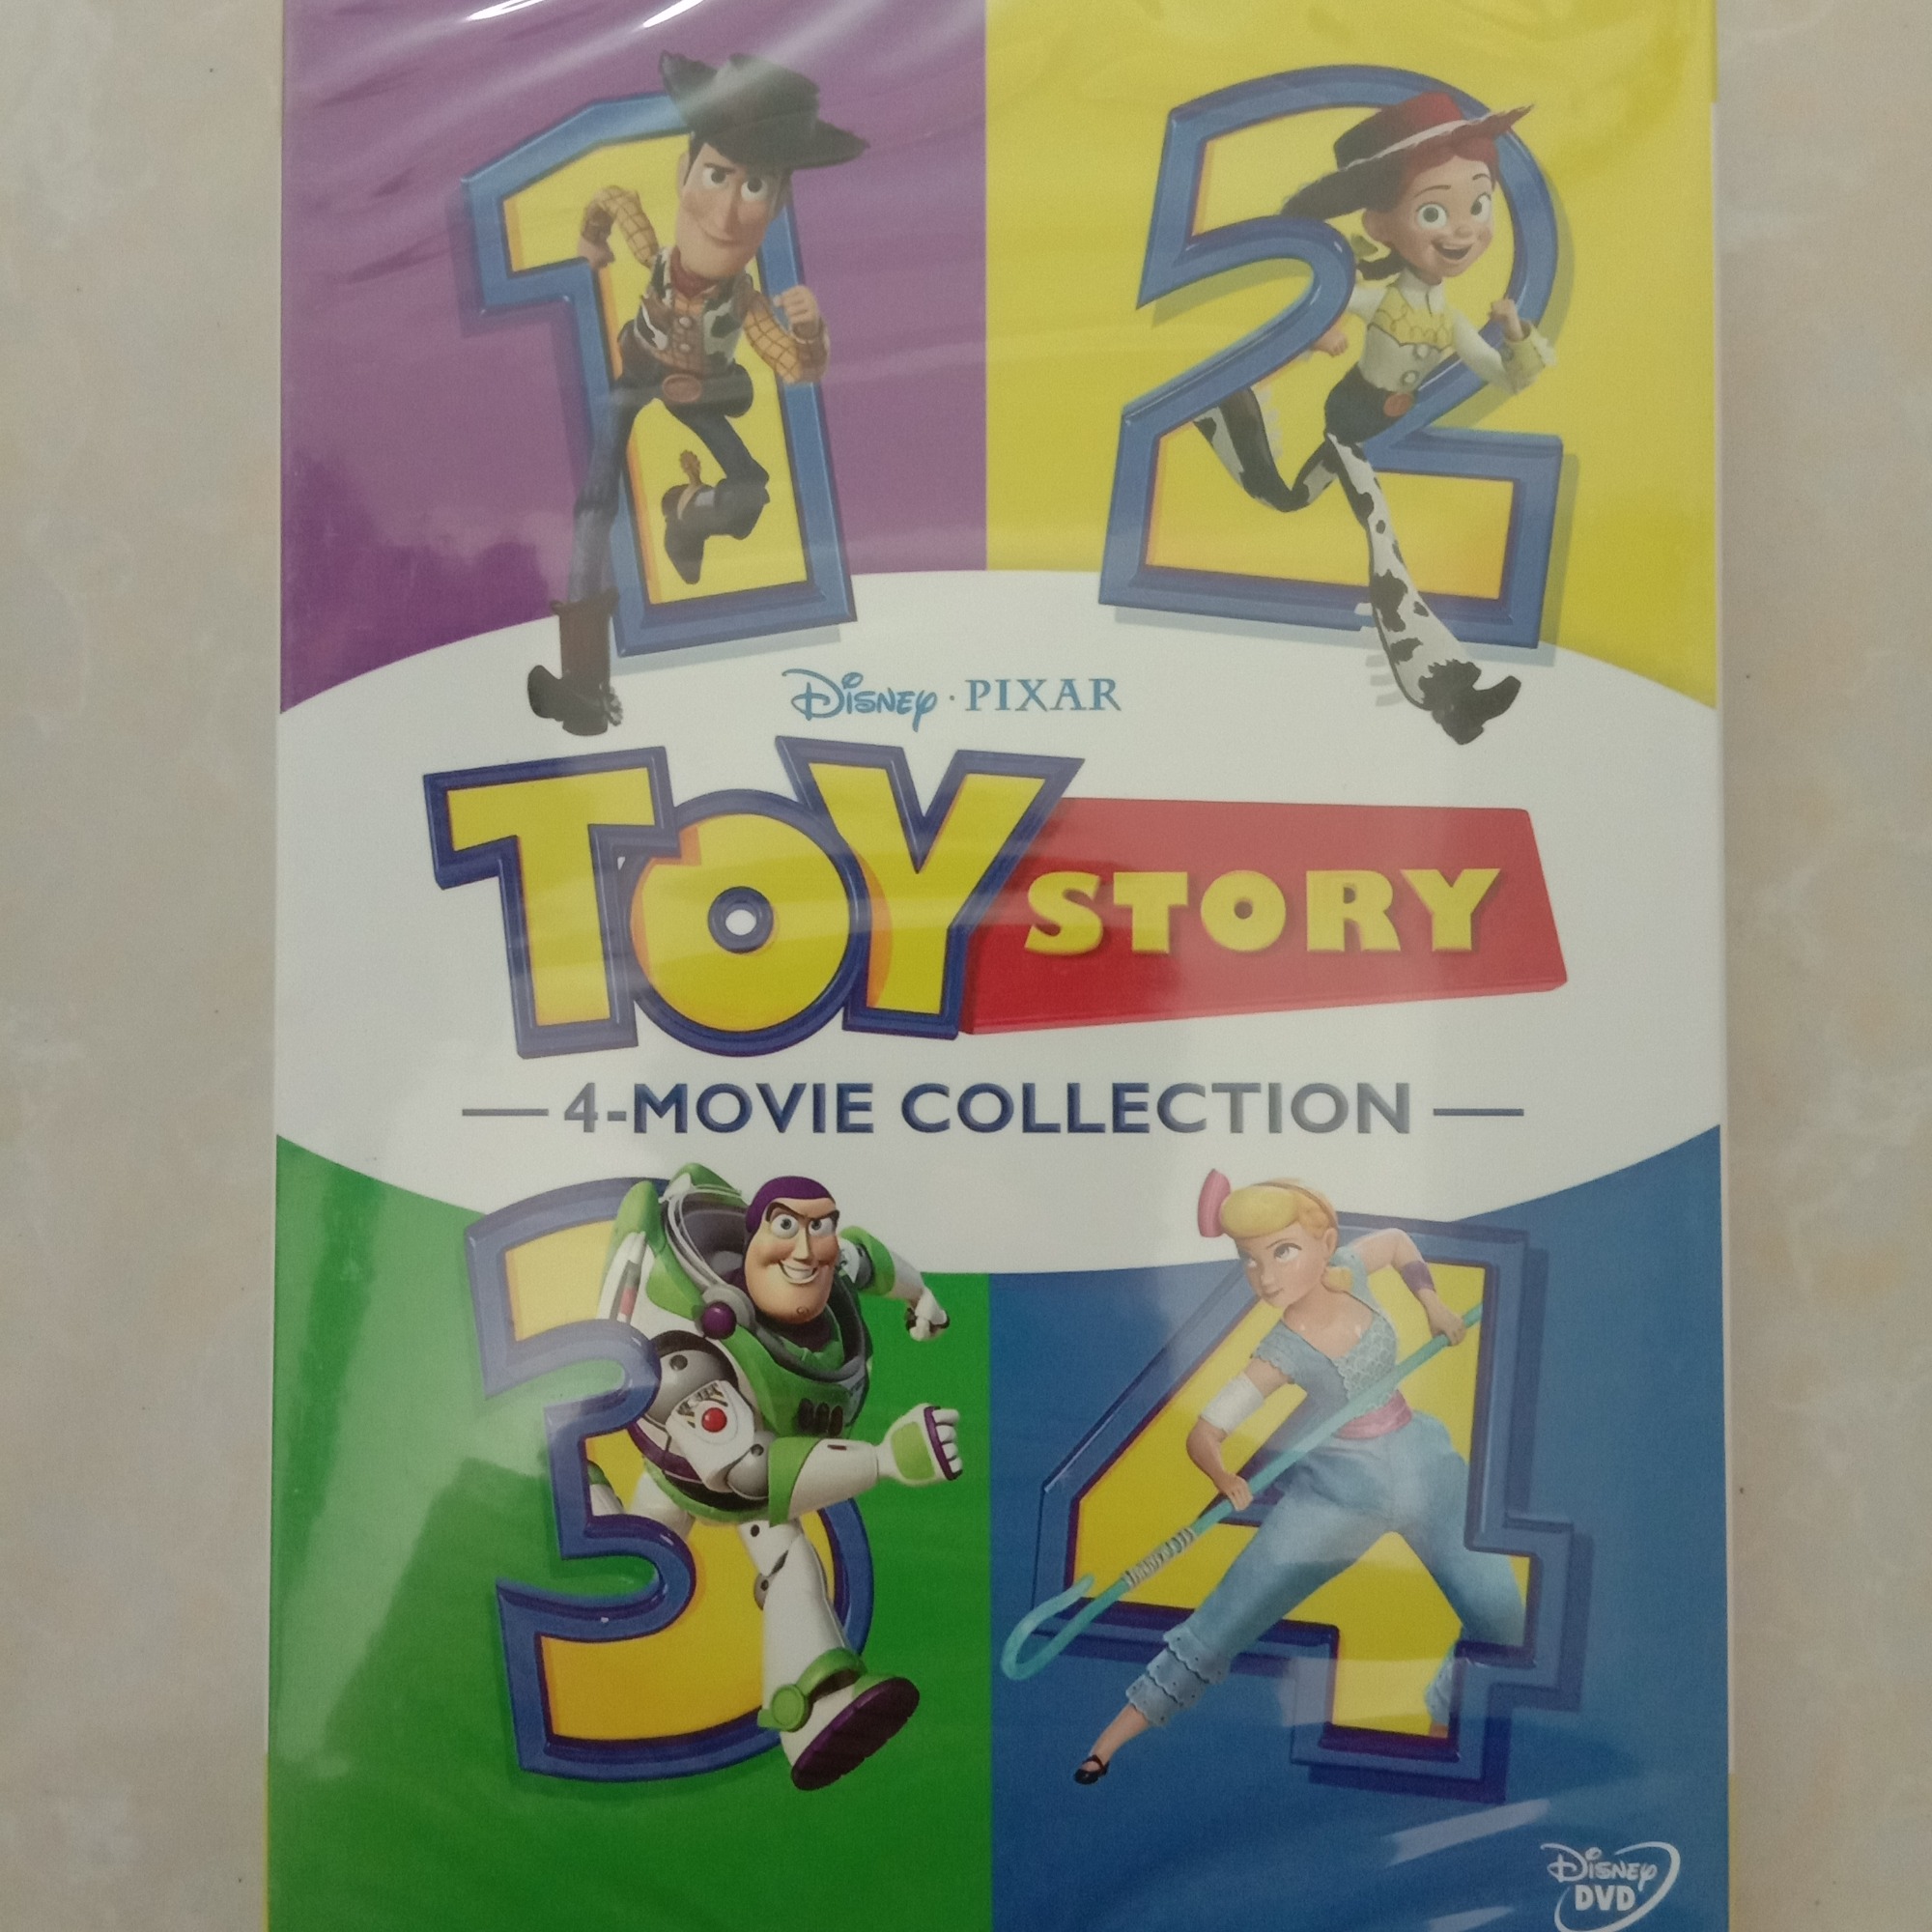 TOY STORY 1-4 Brand New 4-Movie DVD Collection 4 Films 1 2 3 4 （DVD，6-Disc） NEW + Free shipping